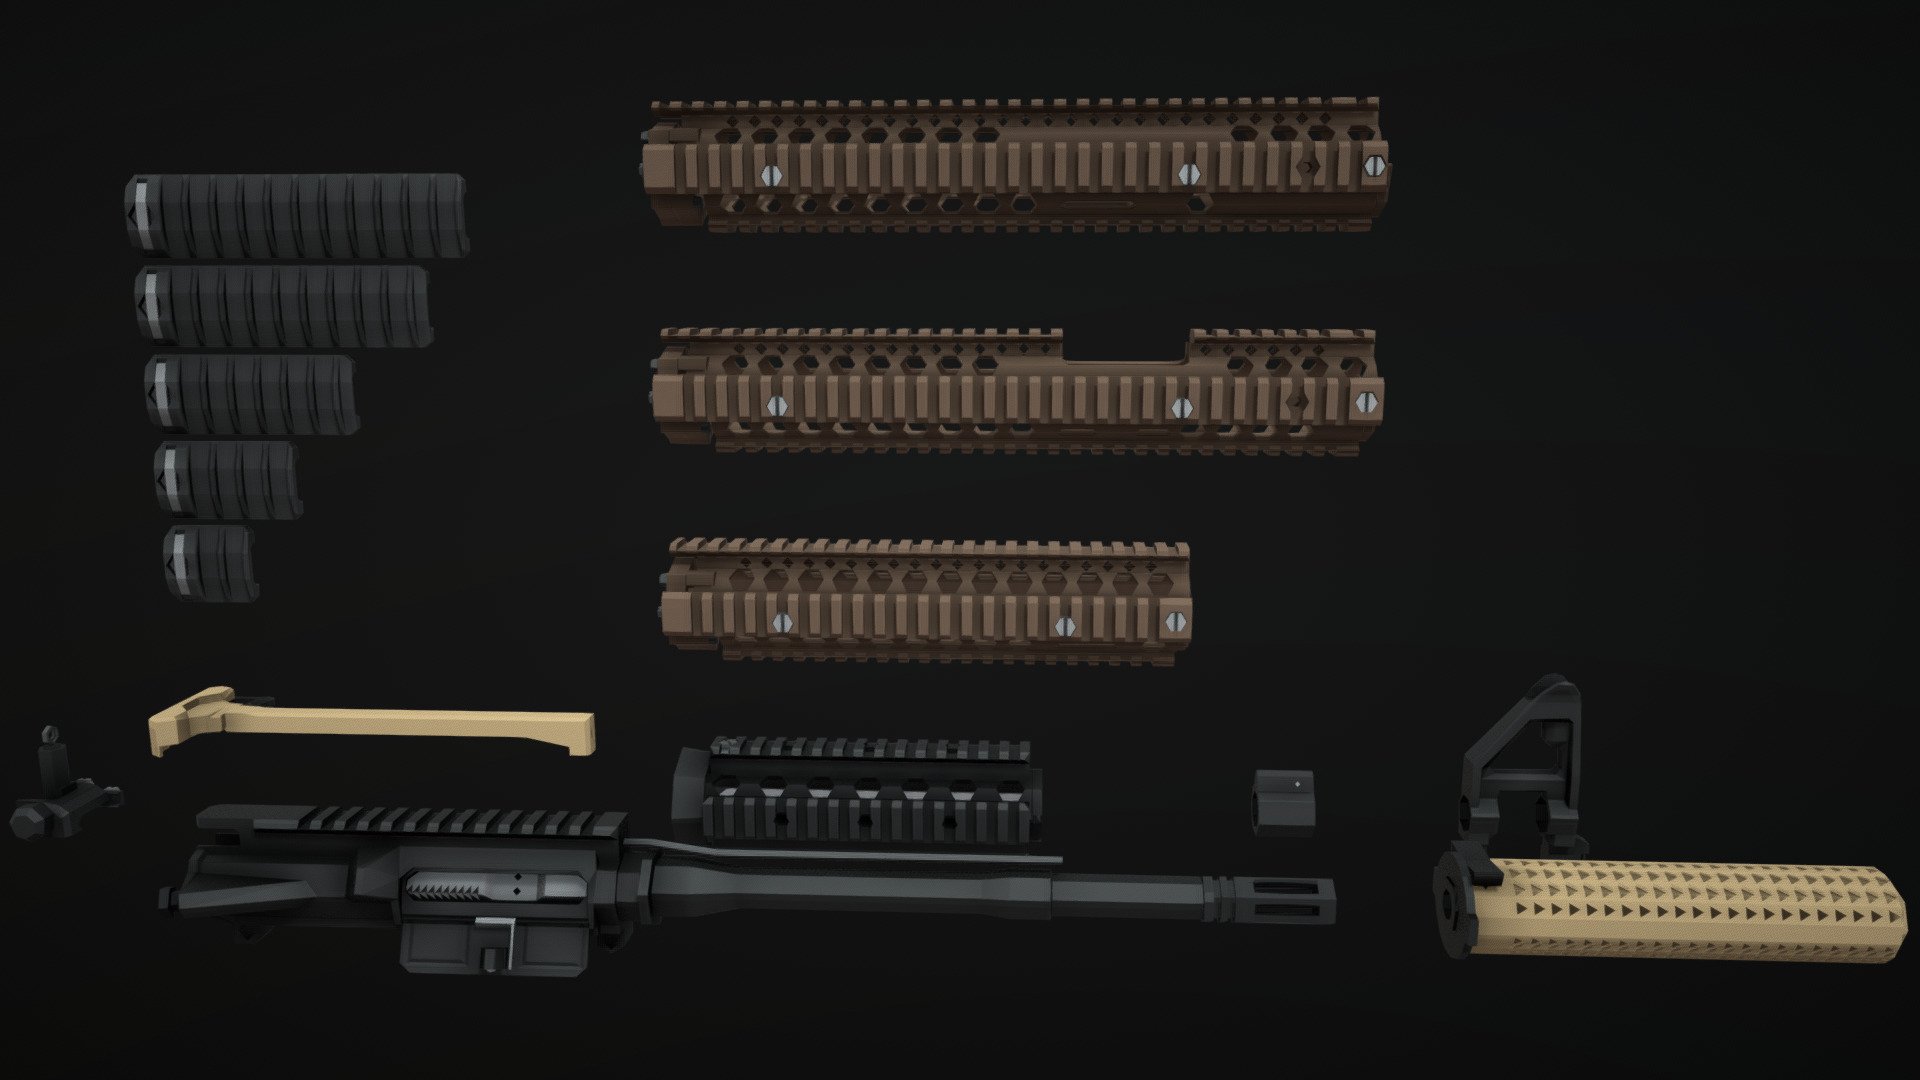 low-poly collection of components of the CQBR system, a series of shortened M4 upper receivers and attachments, including the KAC RIS, the Daniel Defense Mk18 RIS II, M4A1 RIS II,M4A1 RIS II FSP, the KAC Quick Detachable Sound Suppressor (QDSS) along with a mount, the KAC Backup-Ironsight, rail covers, a gas block, and the PRI M84 gas-reduction charging handle 3d model